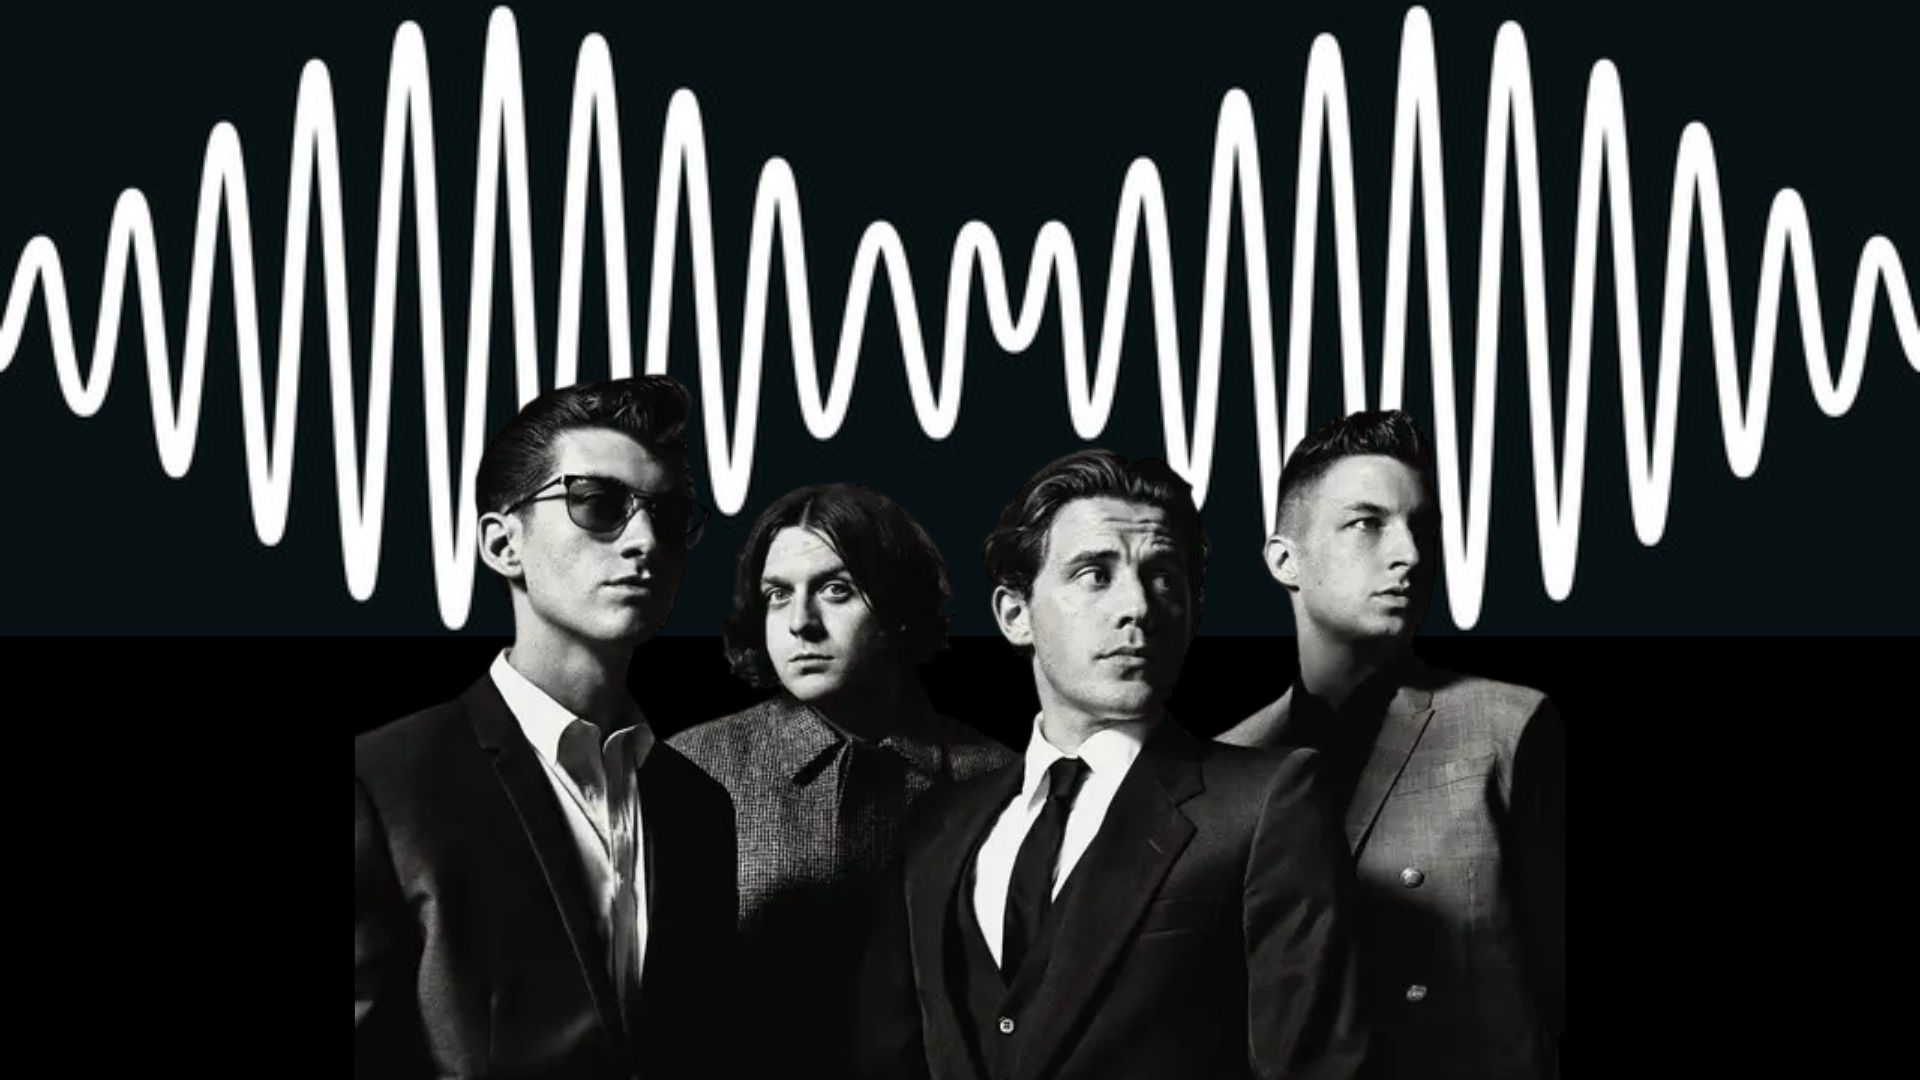 Arctic Monkey’s ‘Do I Wanna Know’ was released 10 years ago! thumbnail